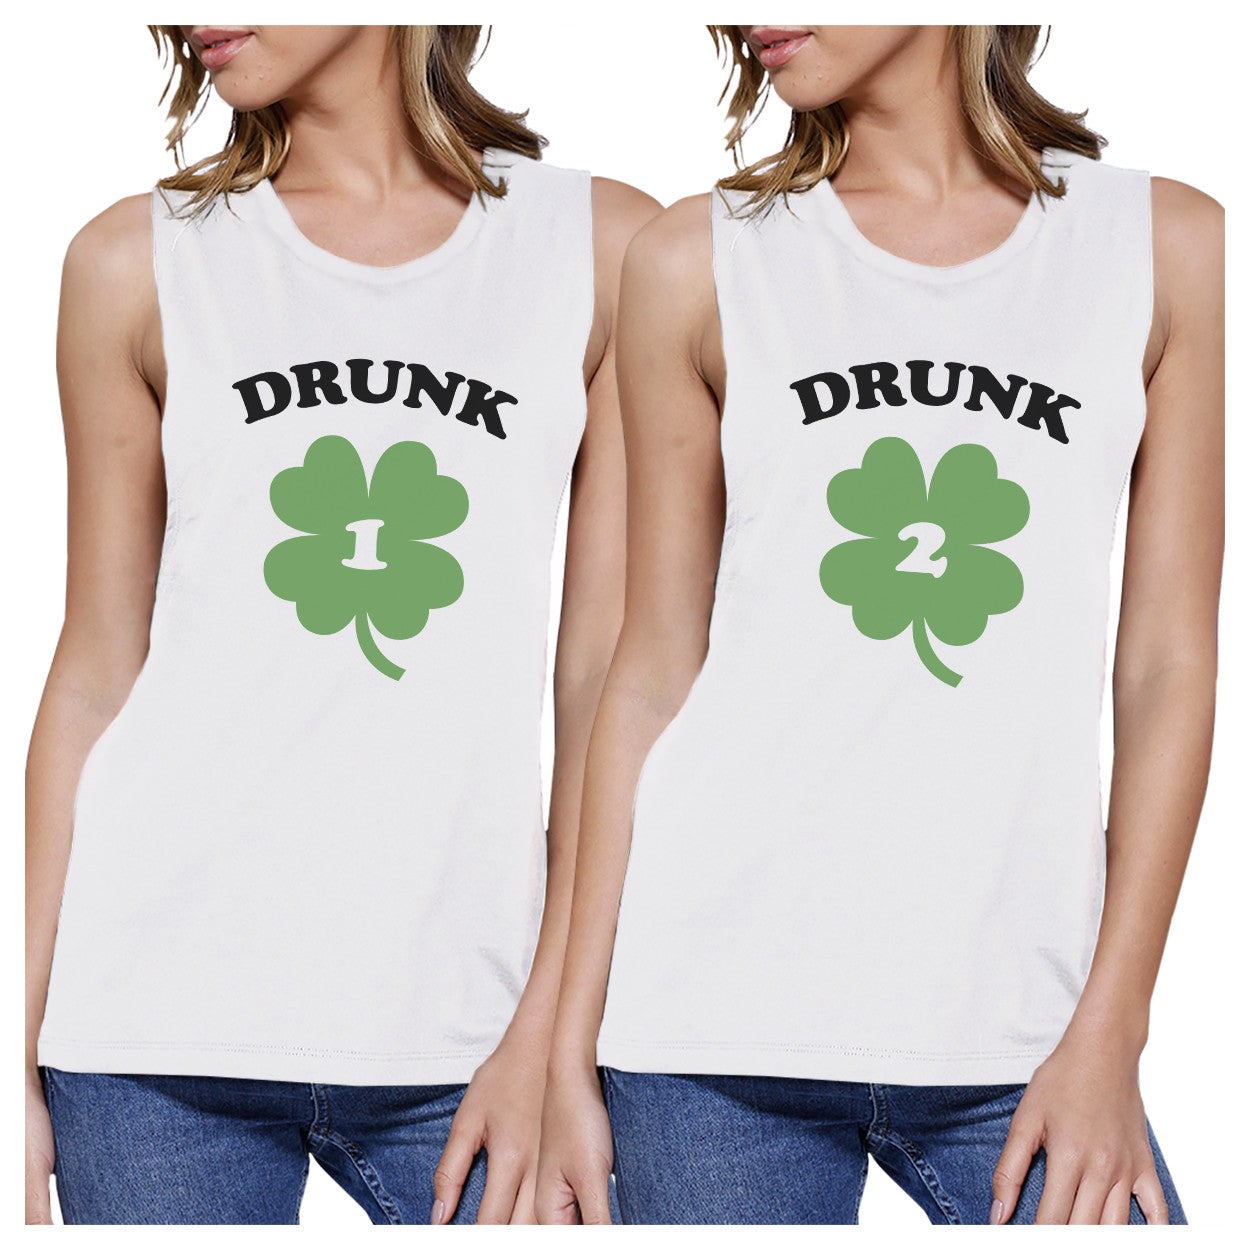 Drunk1 Drunk2 Womens White Muscle Top Marching T Shirt Patricks Day - 365 In Love